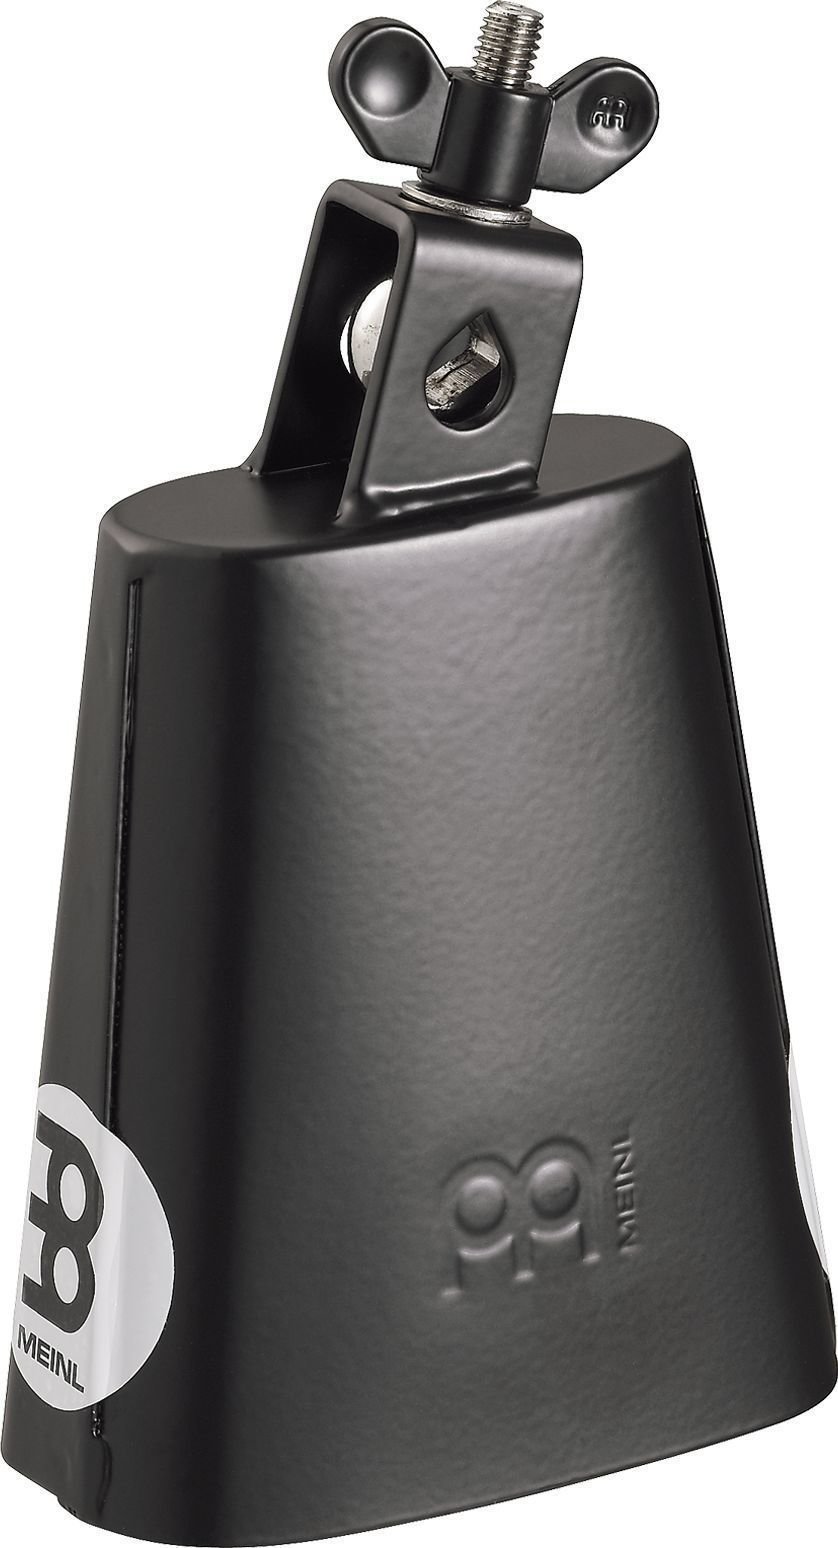 Percussion Cowbell Meinl SL475-BK Percussion Cowbell